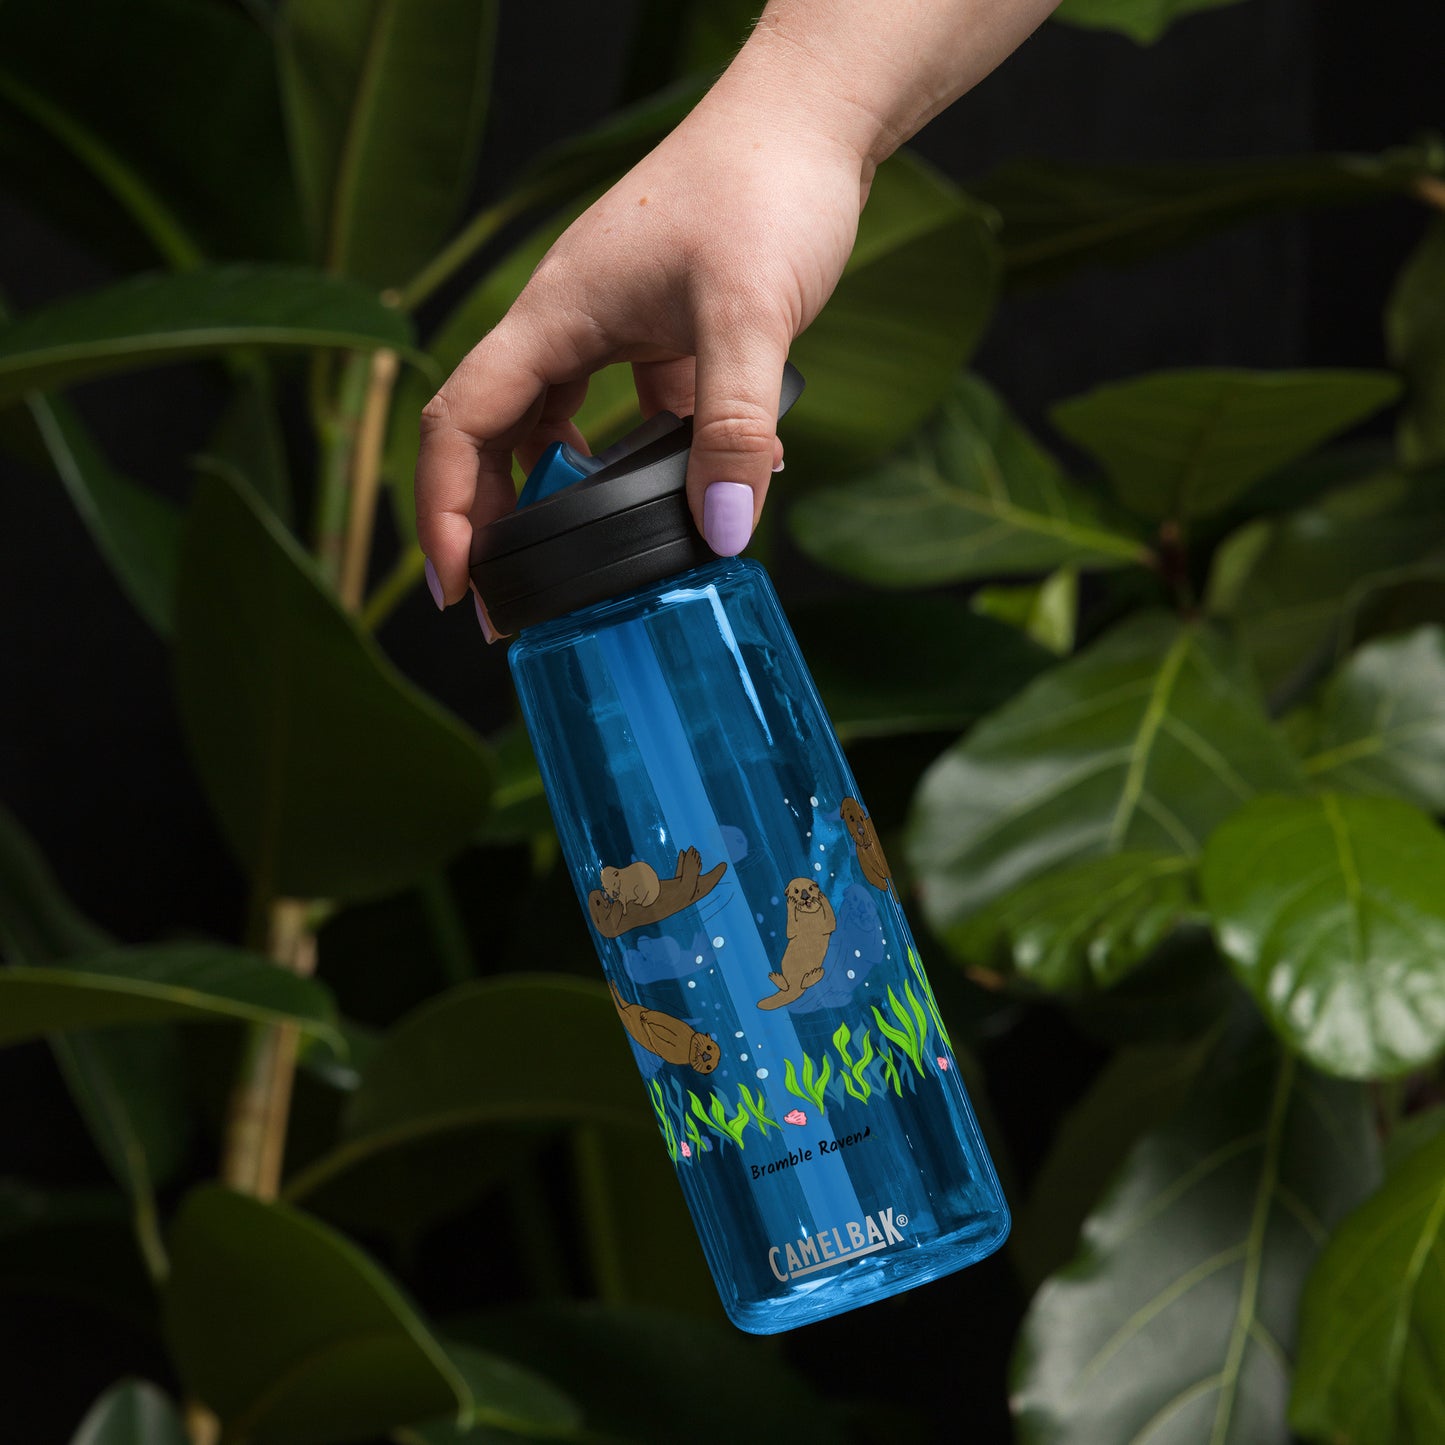 25 ounce sports water bottle with spill proof lid and bite valve. Dark blue stain and odor-resistant BPA-free plastic with sea otter designs around the bottle, swimming above the seaweed and shells. Shown in model's hand by plants.